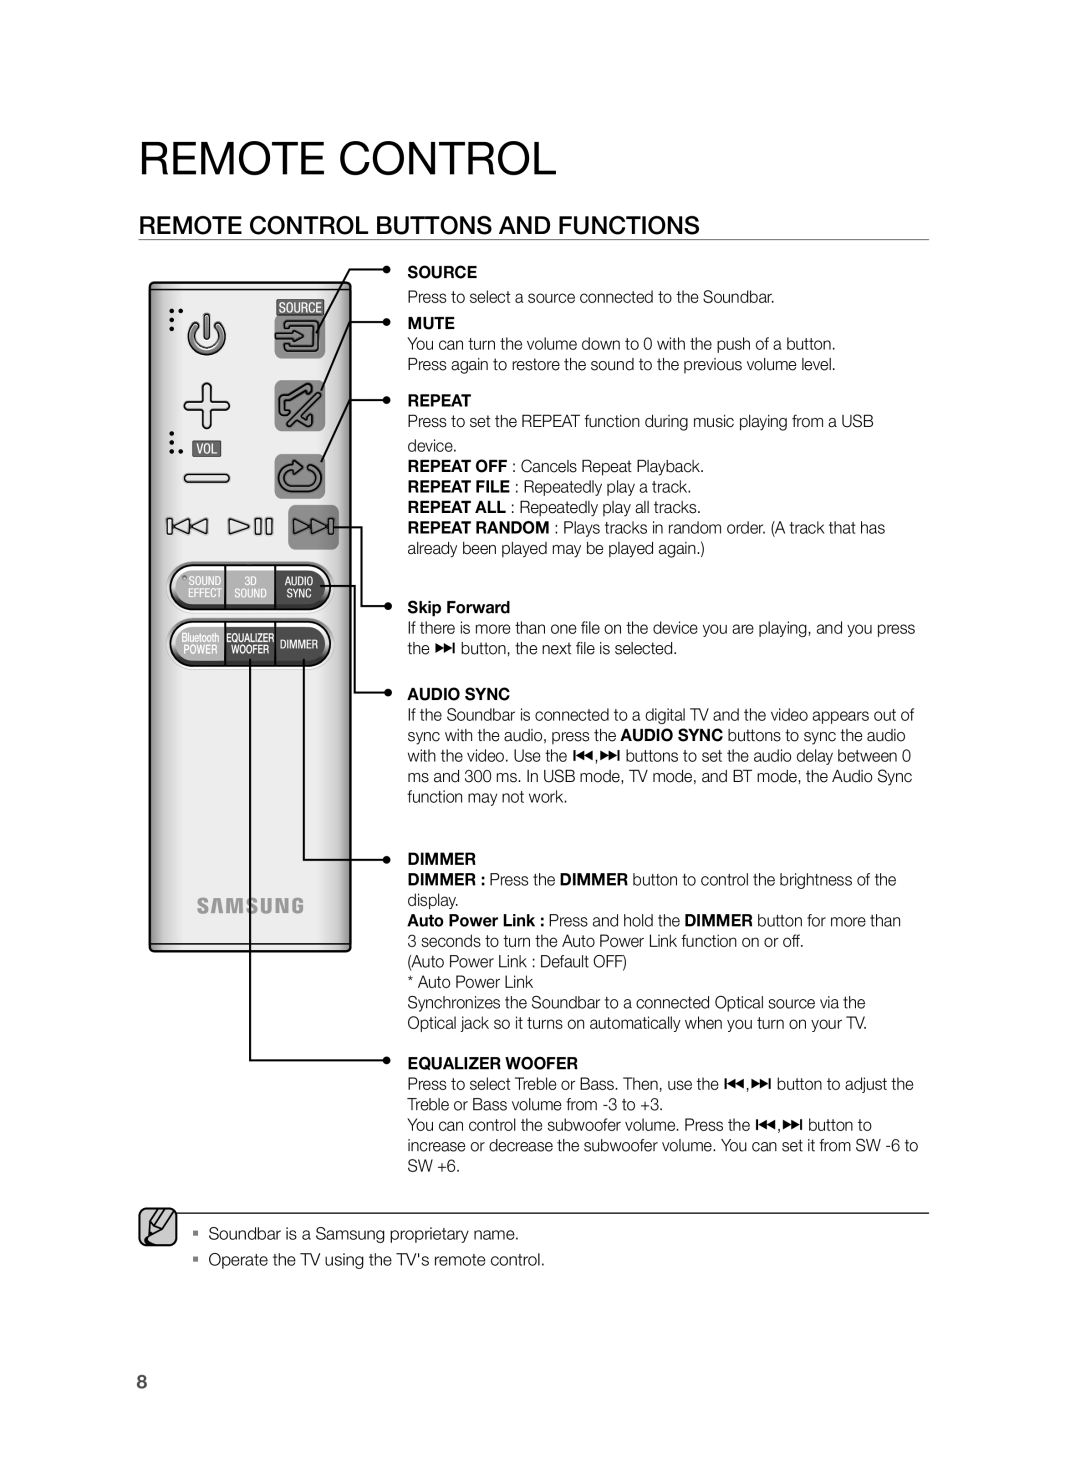 Samsung HW-H430/ZF manual Remote Control Buttons And Functions, Source, Mute, Repeat, Skip Forward, Audio Sync, Dimmer 